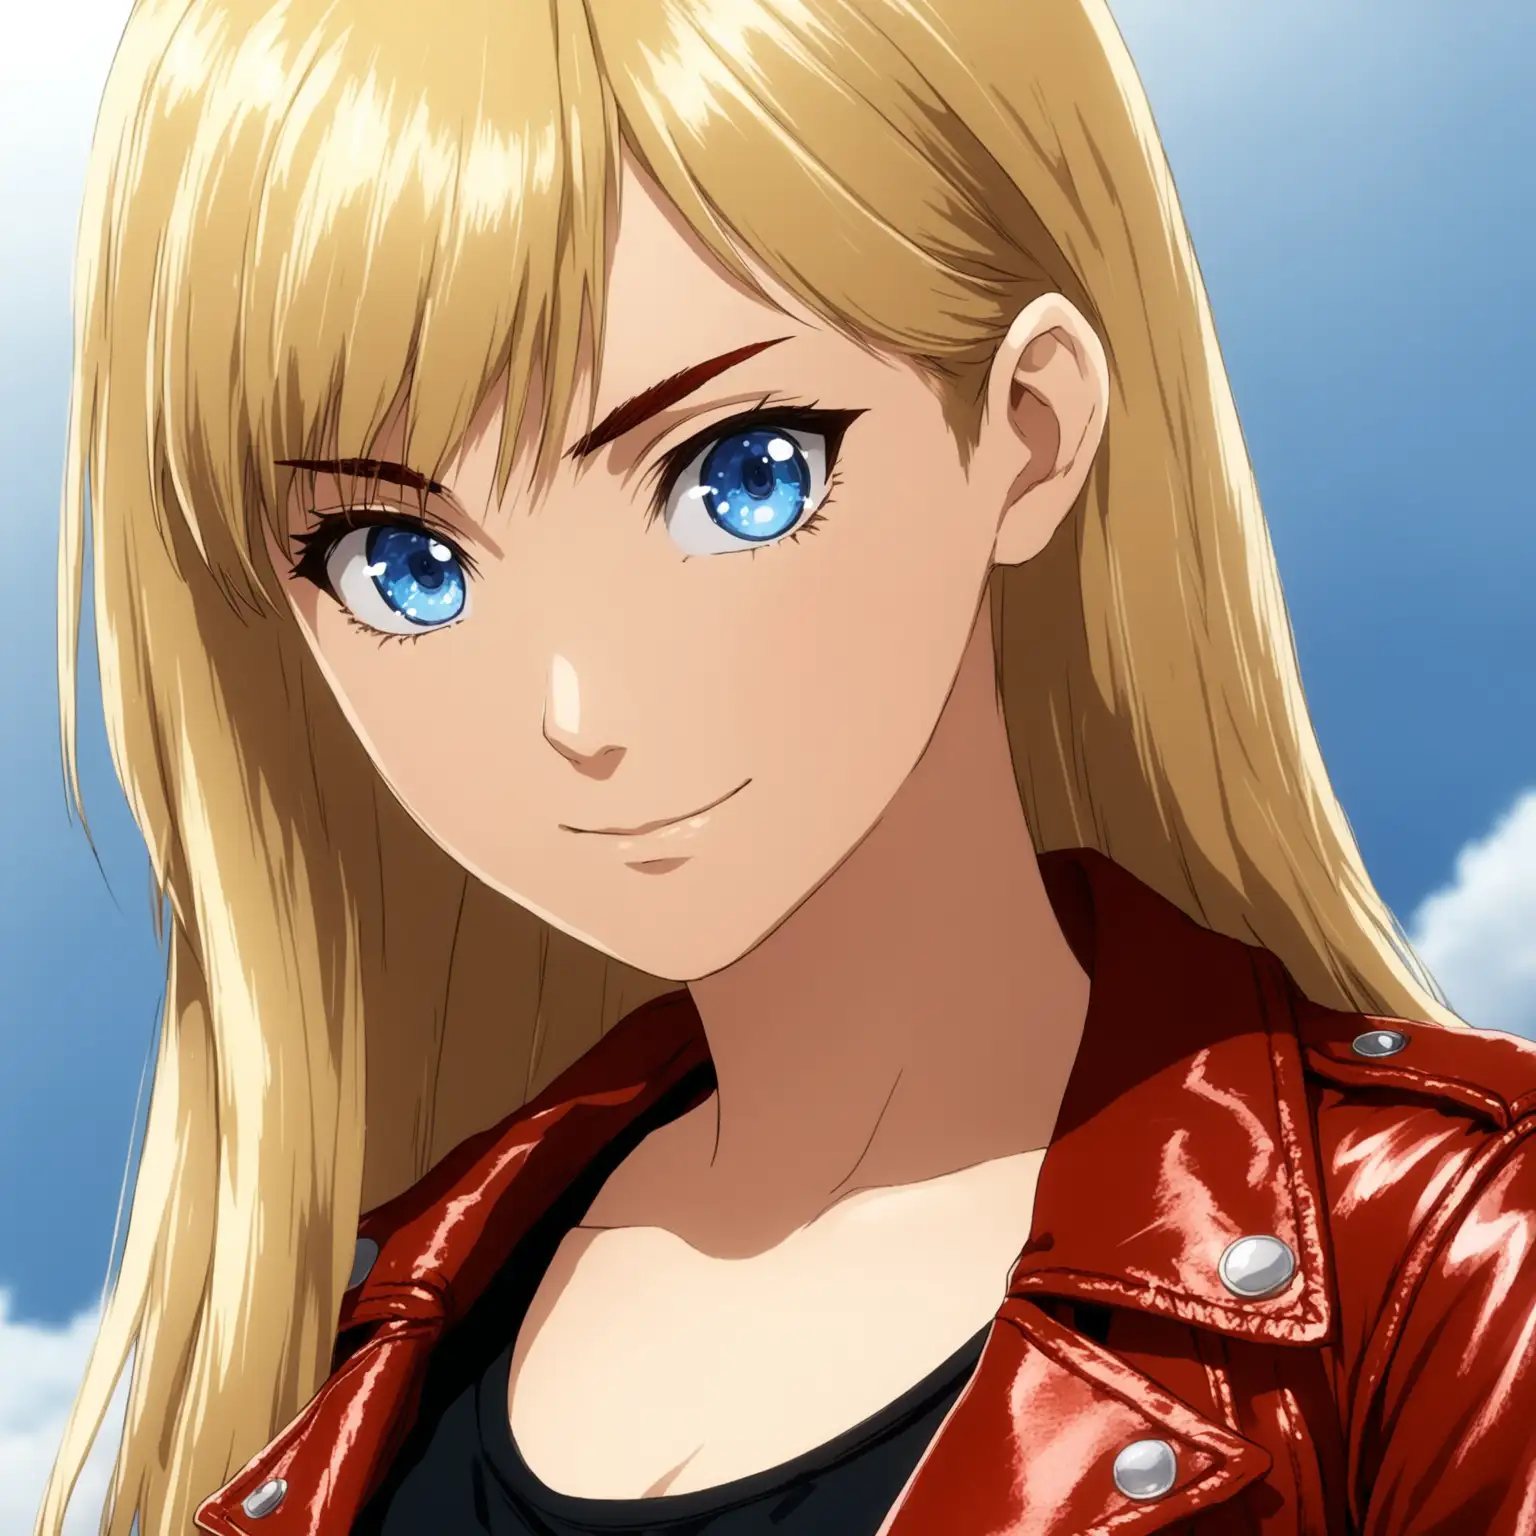 Young Woman in Red Leather Jacket Anime Style Portrait with Blonde Hair